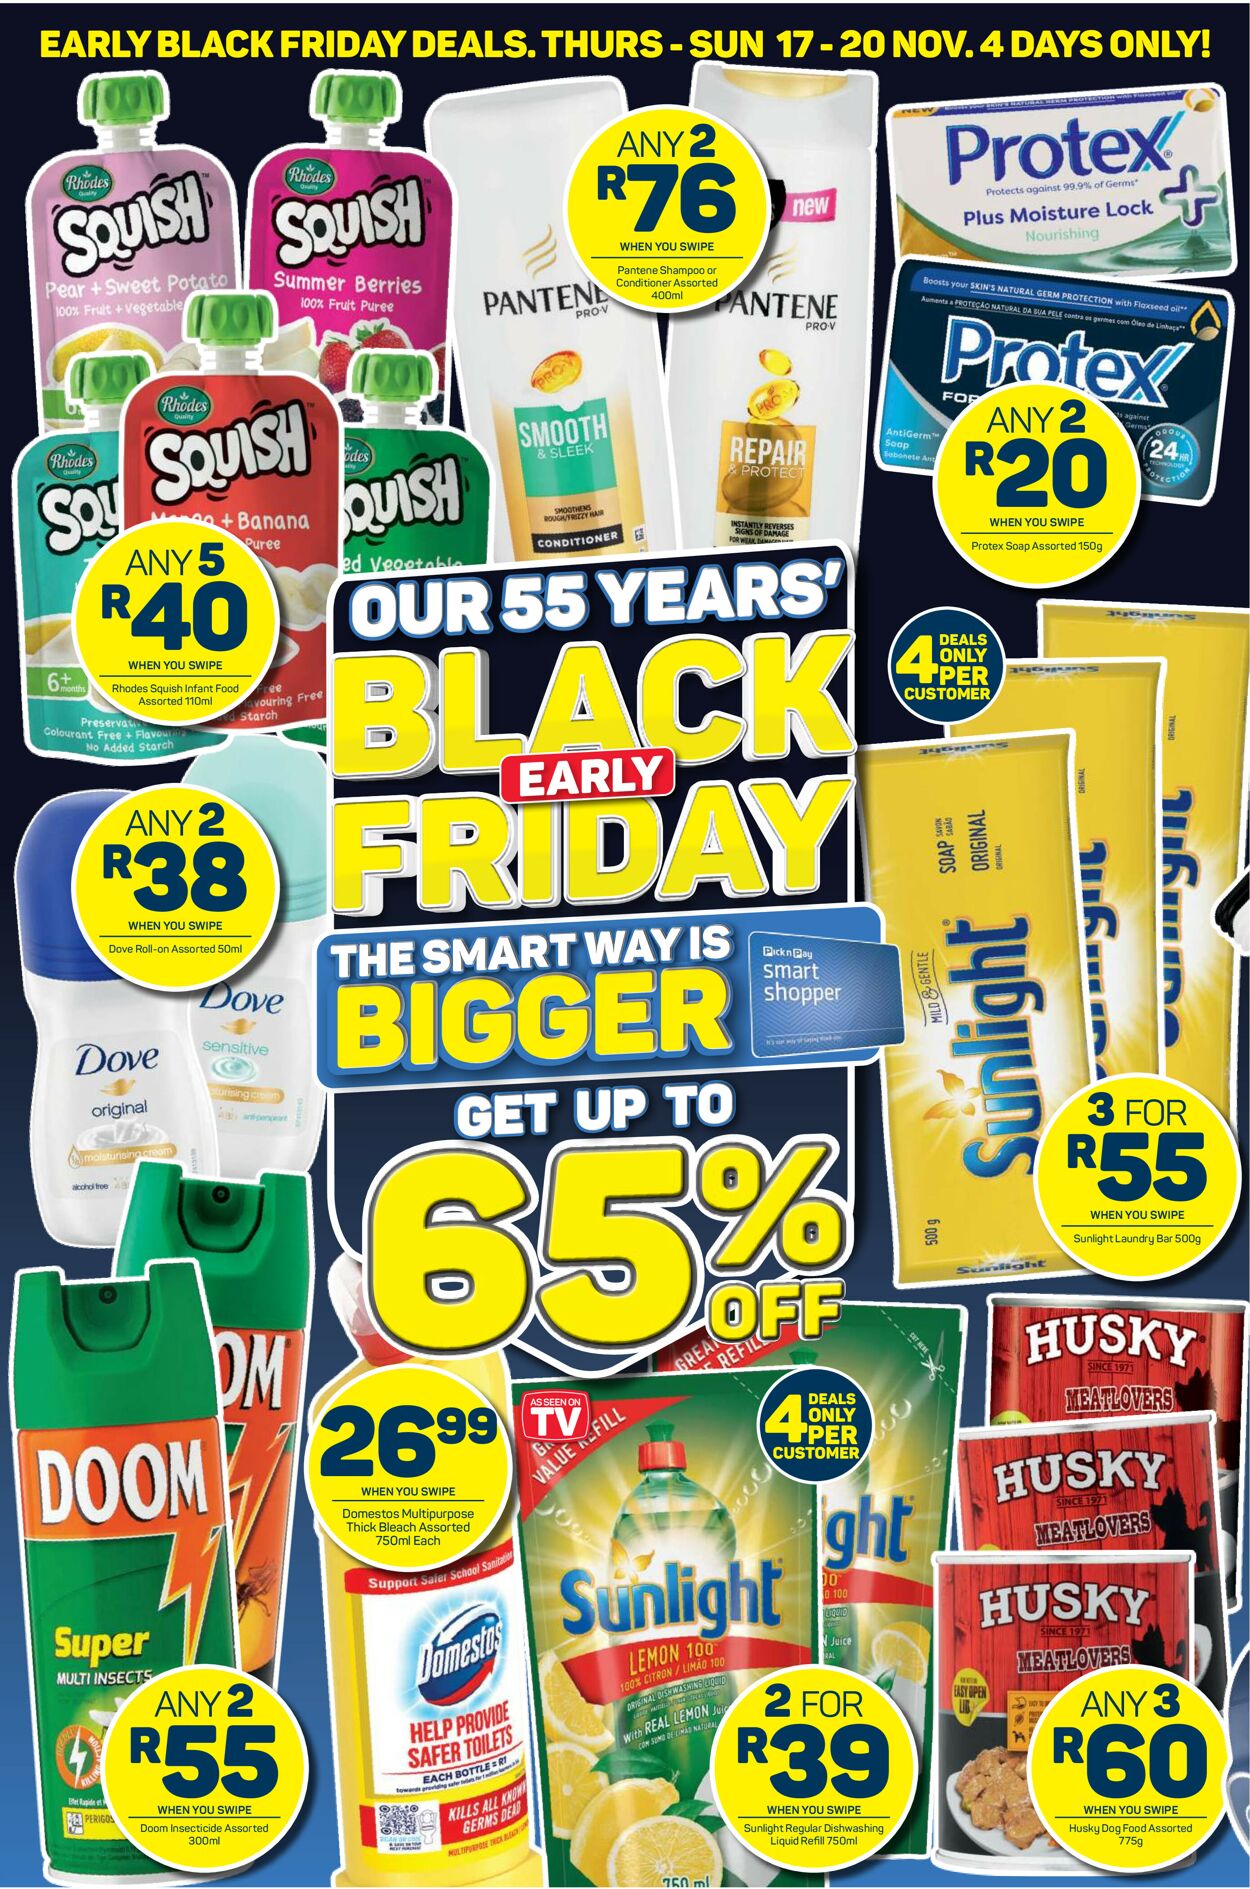 Pick n Pay Catalogue - 2022/11/17-2022/11/20 (Page 4)